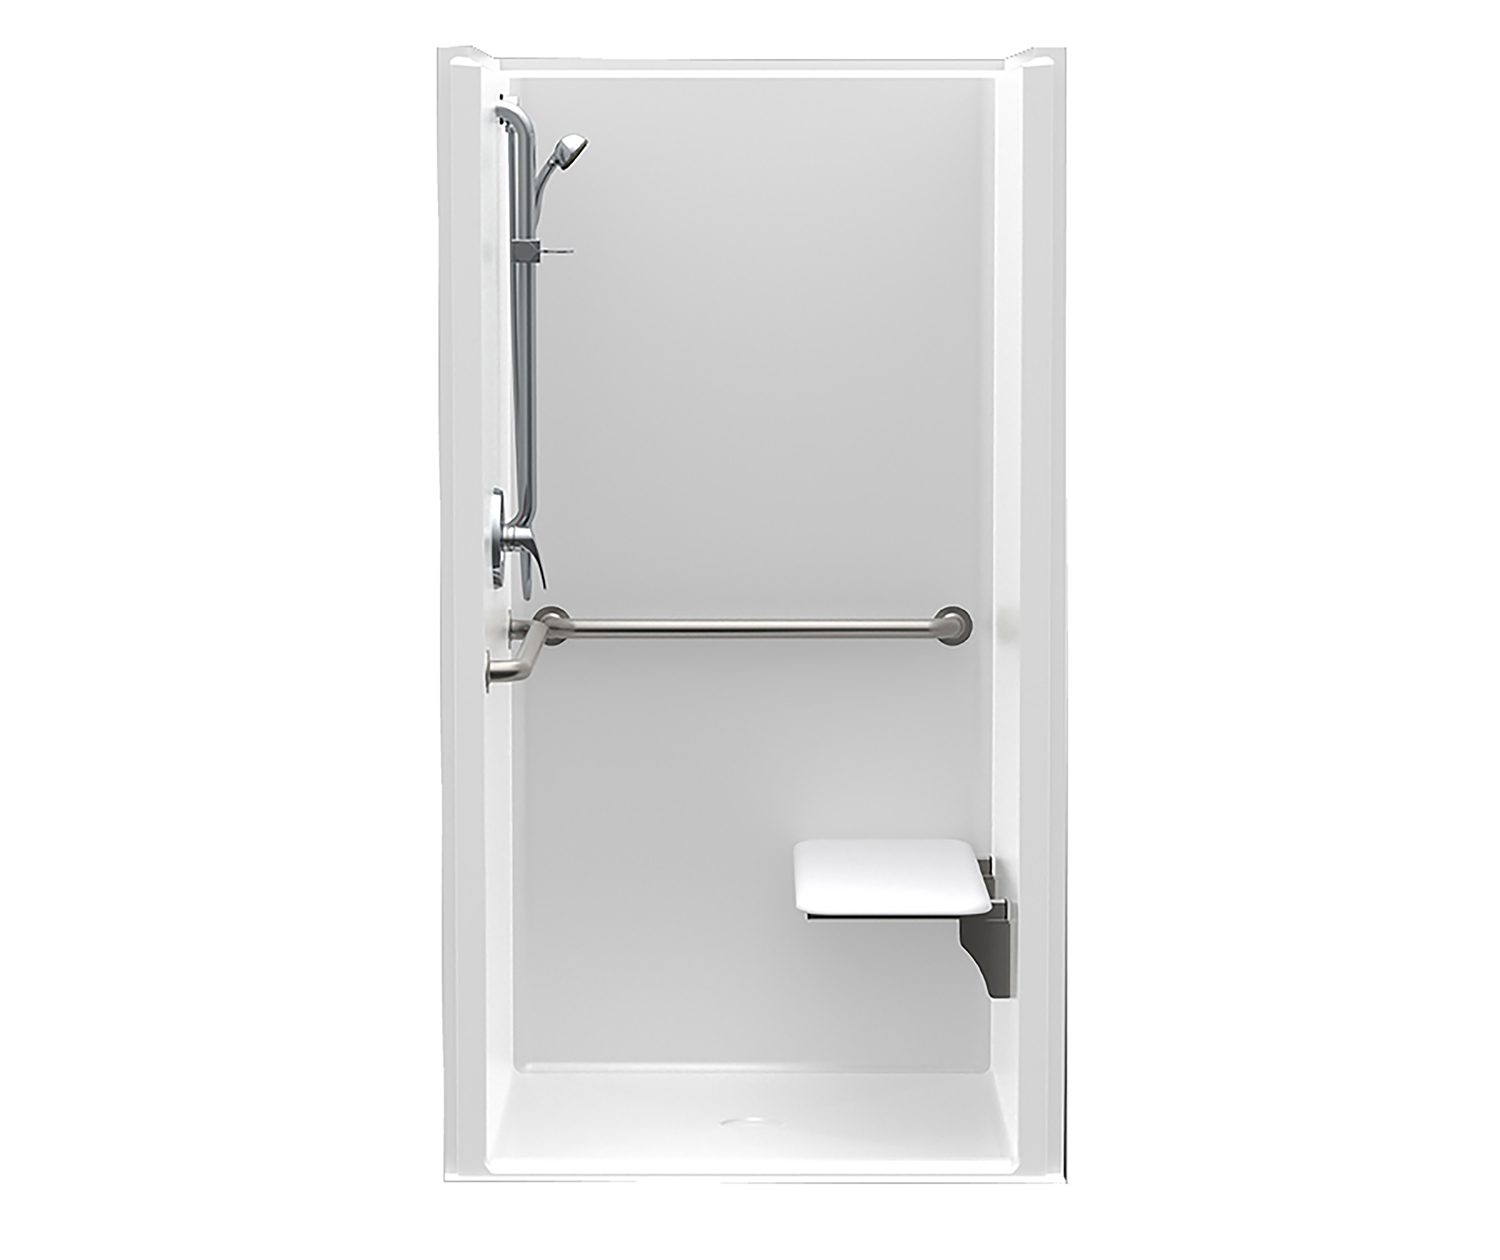 Aquatic Everyday 60 in. x 36 in. x 76 in. 1-Piece Shower Stall